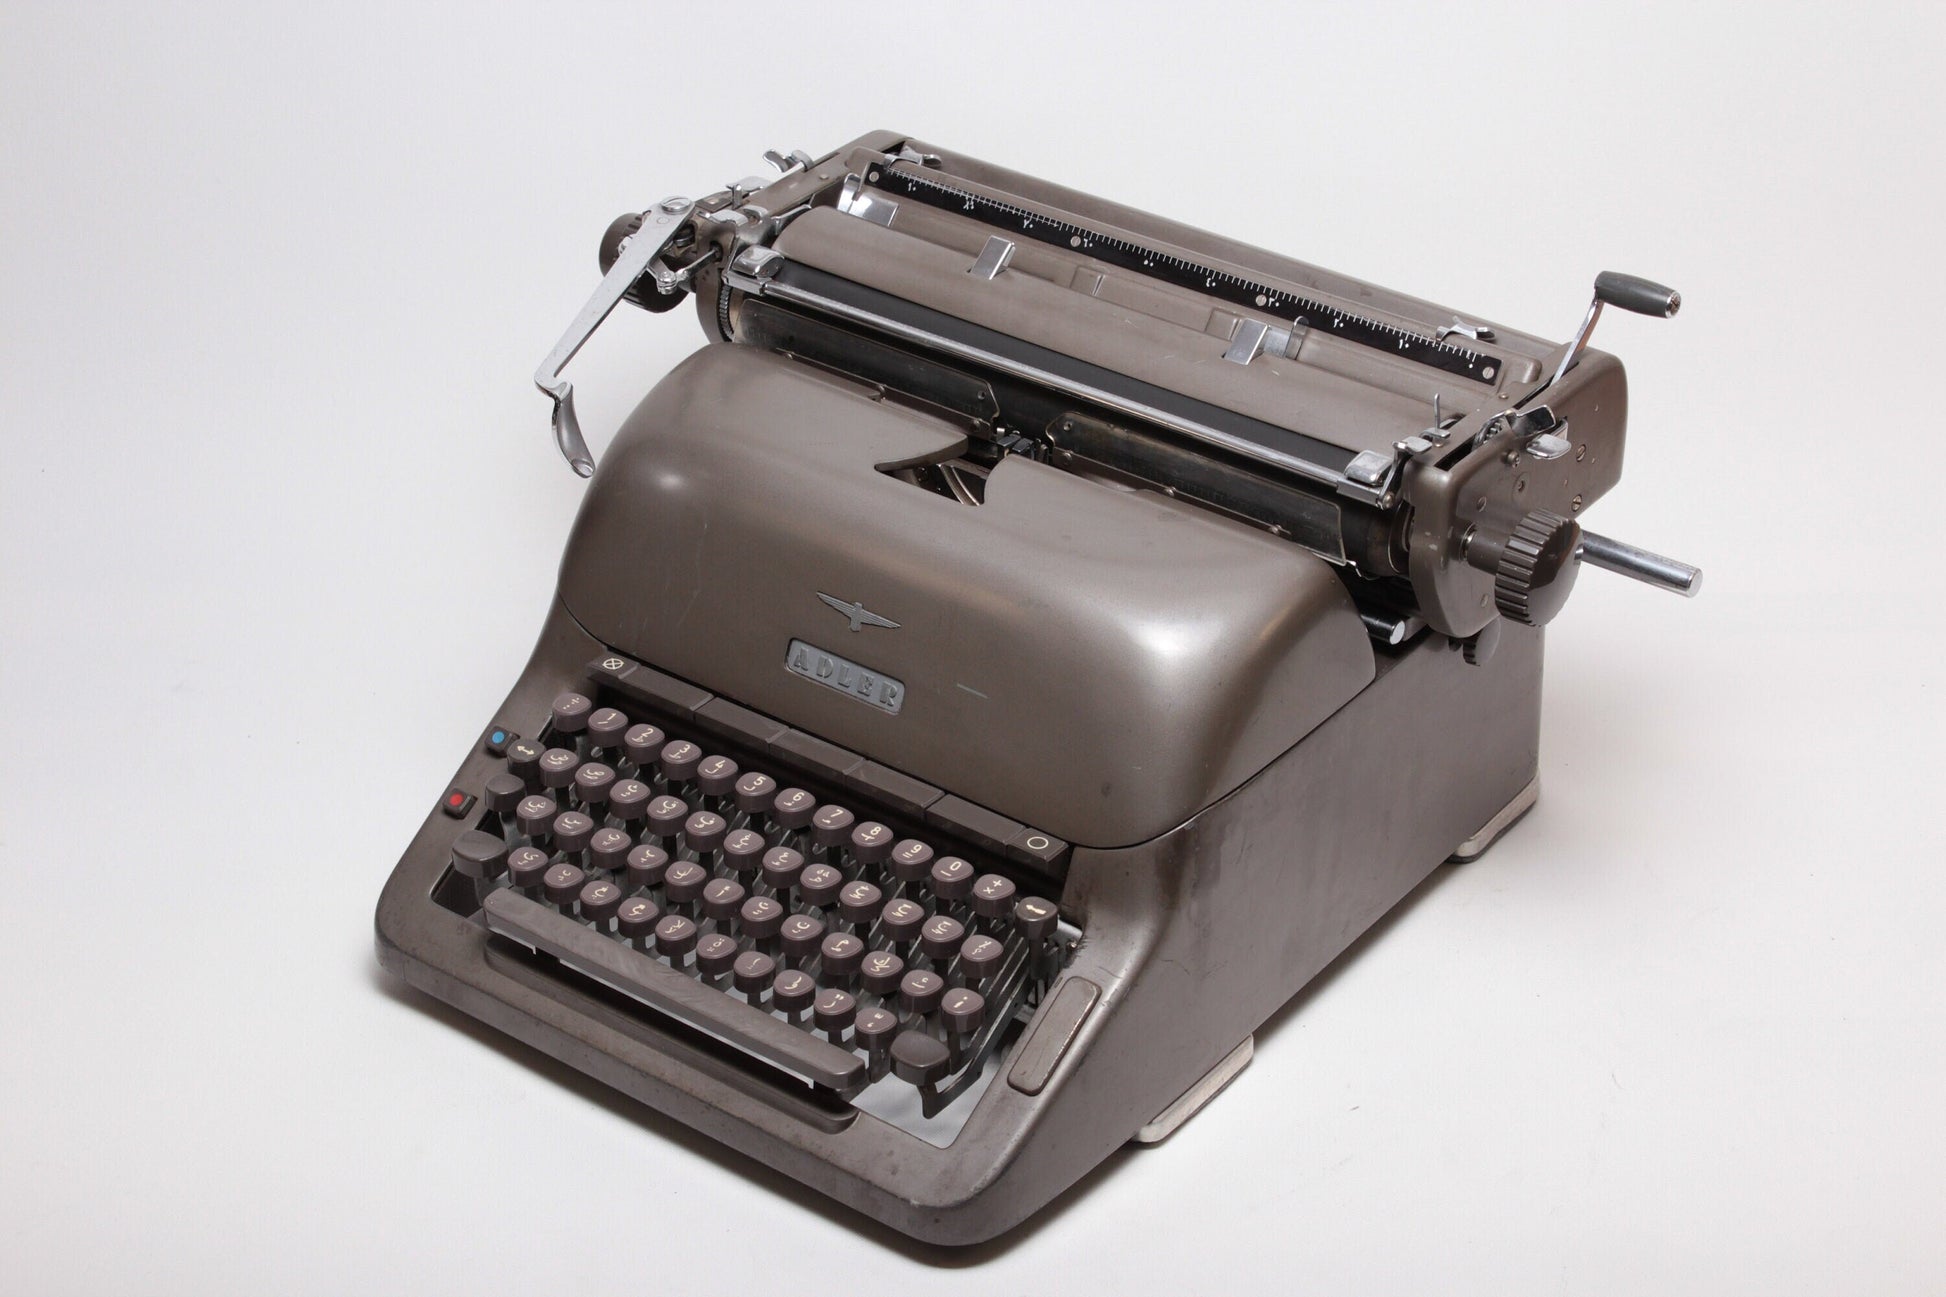 Adler Standard, Arabic/Persian/Farsi, ماشین تحریر, Brown Typewriter, Vintage, Mint Condition, Professionally Serviced by Typewriter.Company